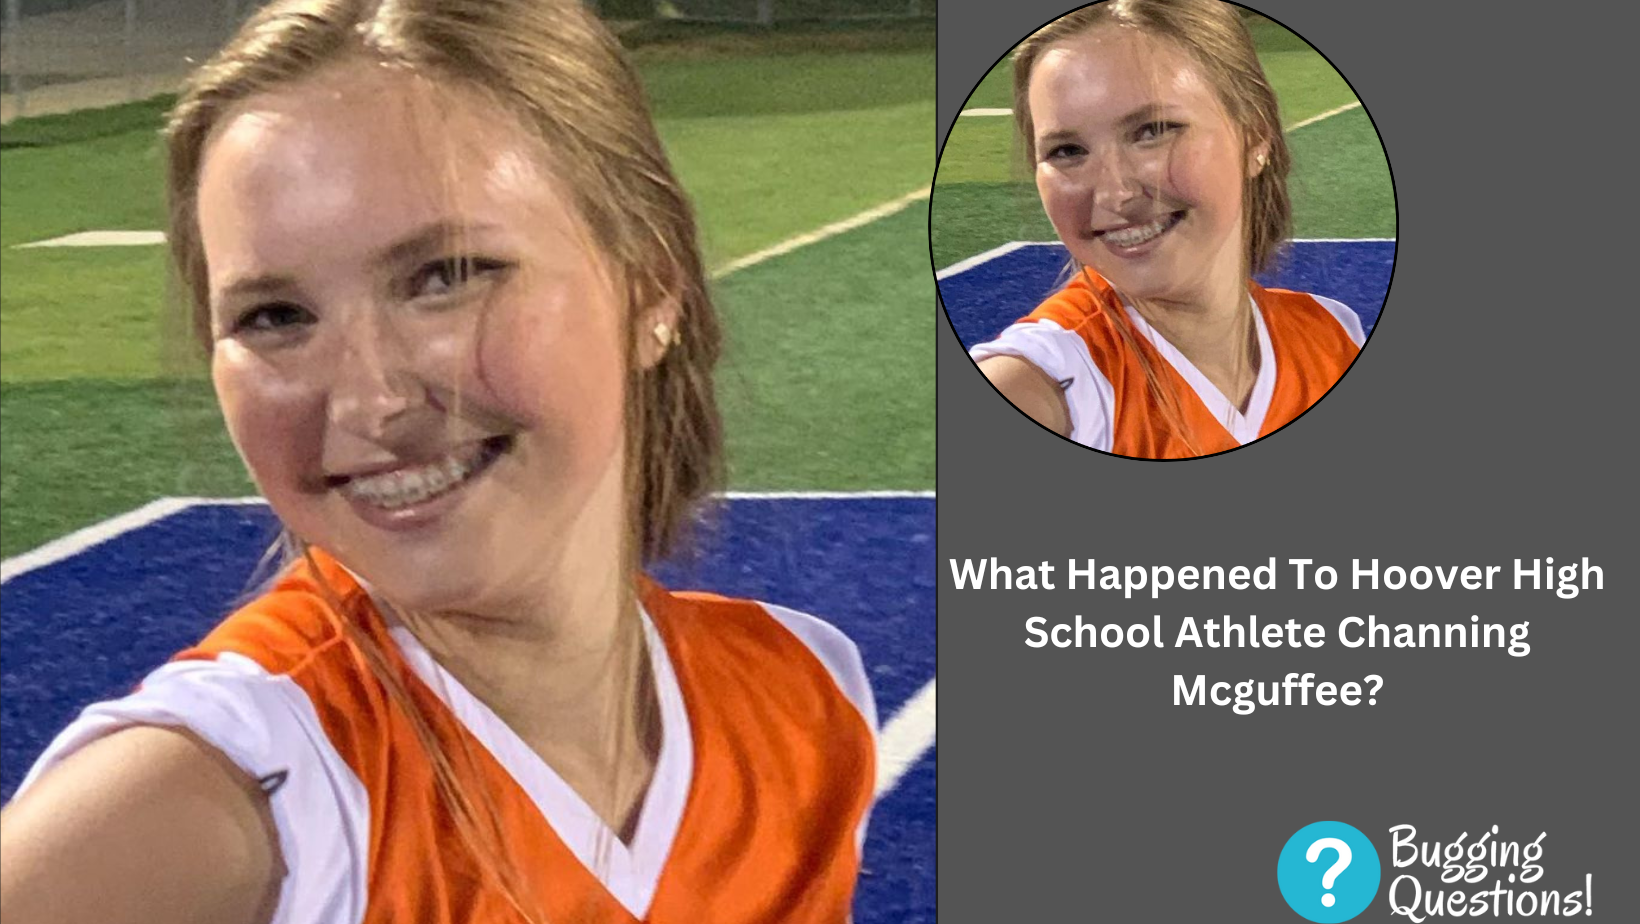 What Happened To Hoover High School Athlete Channing Mcguffee?